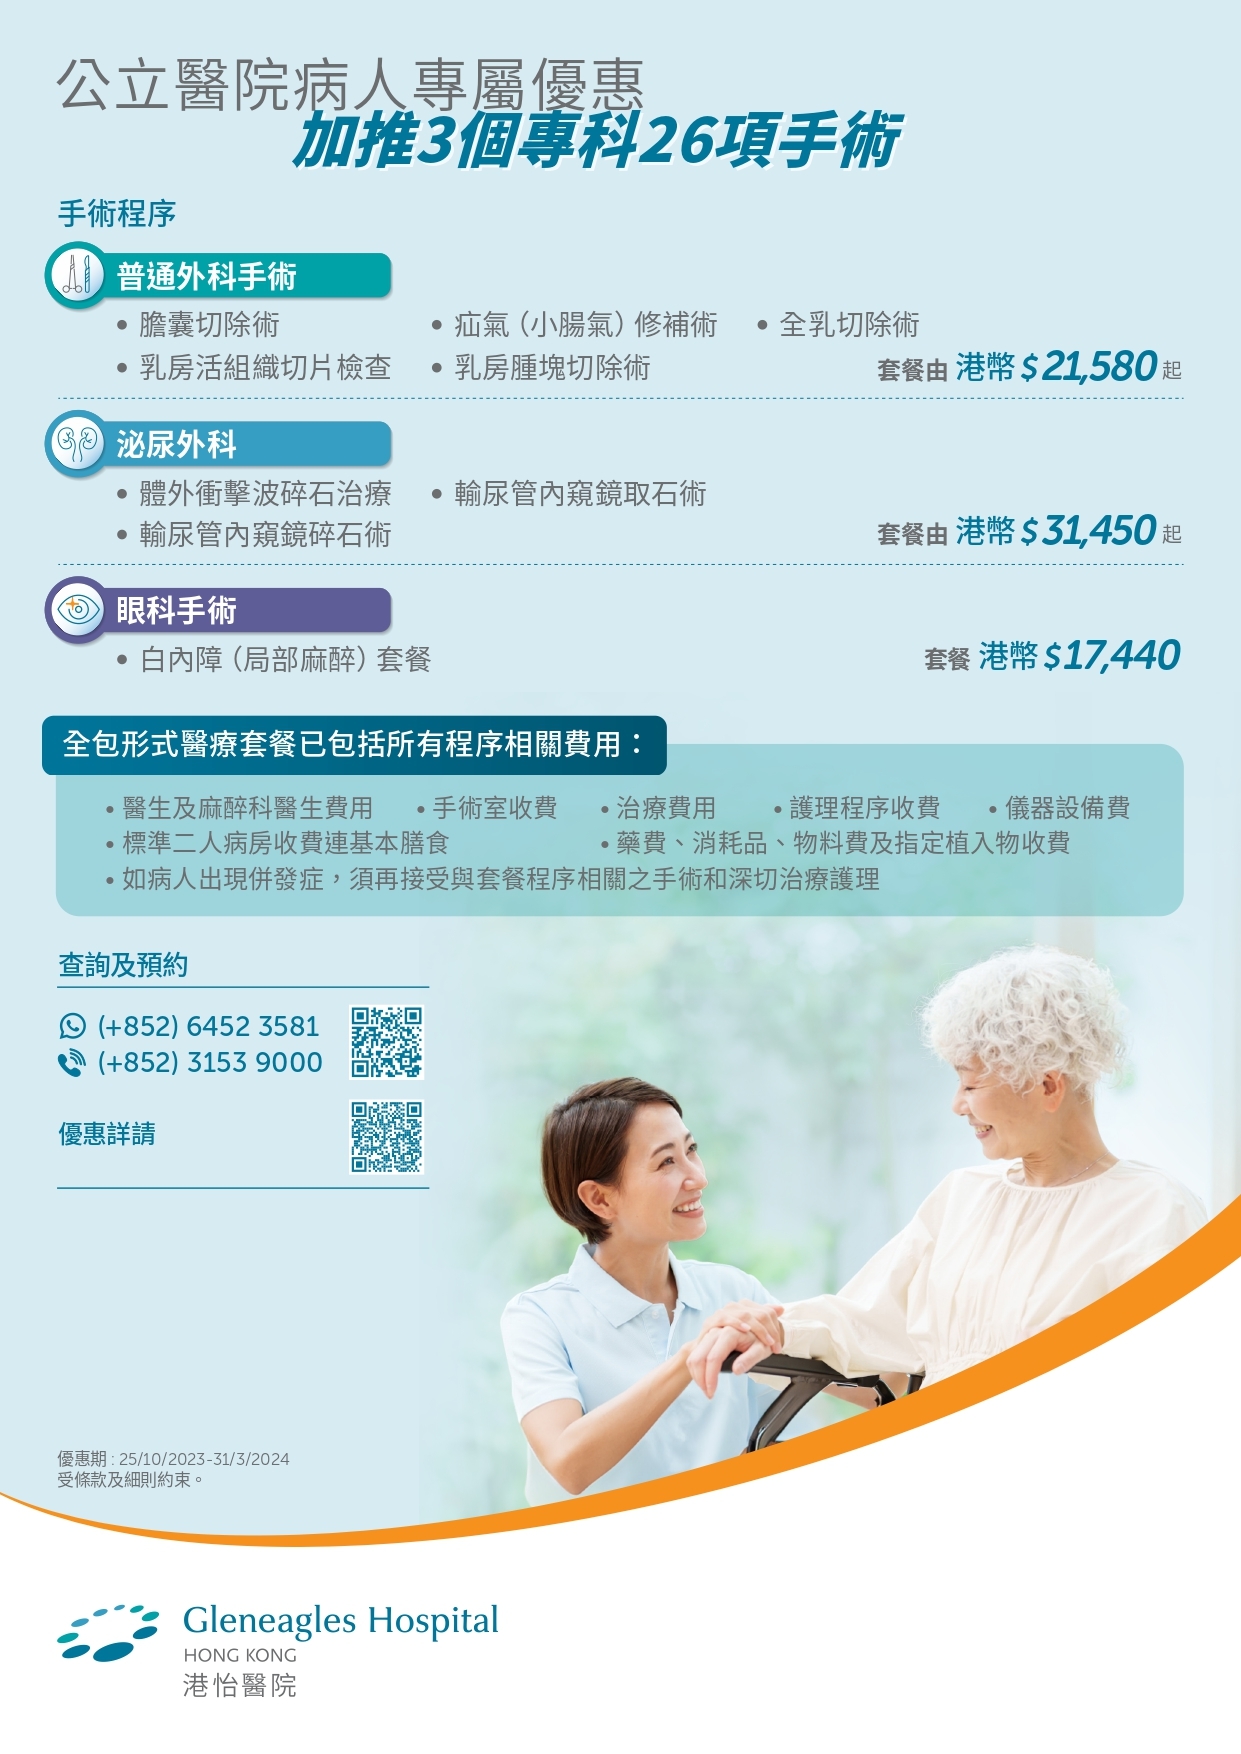 A4-HA-Referral-Add-on-offer-poster-05-1_page-0001.jpg#asset:269900